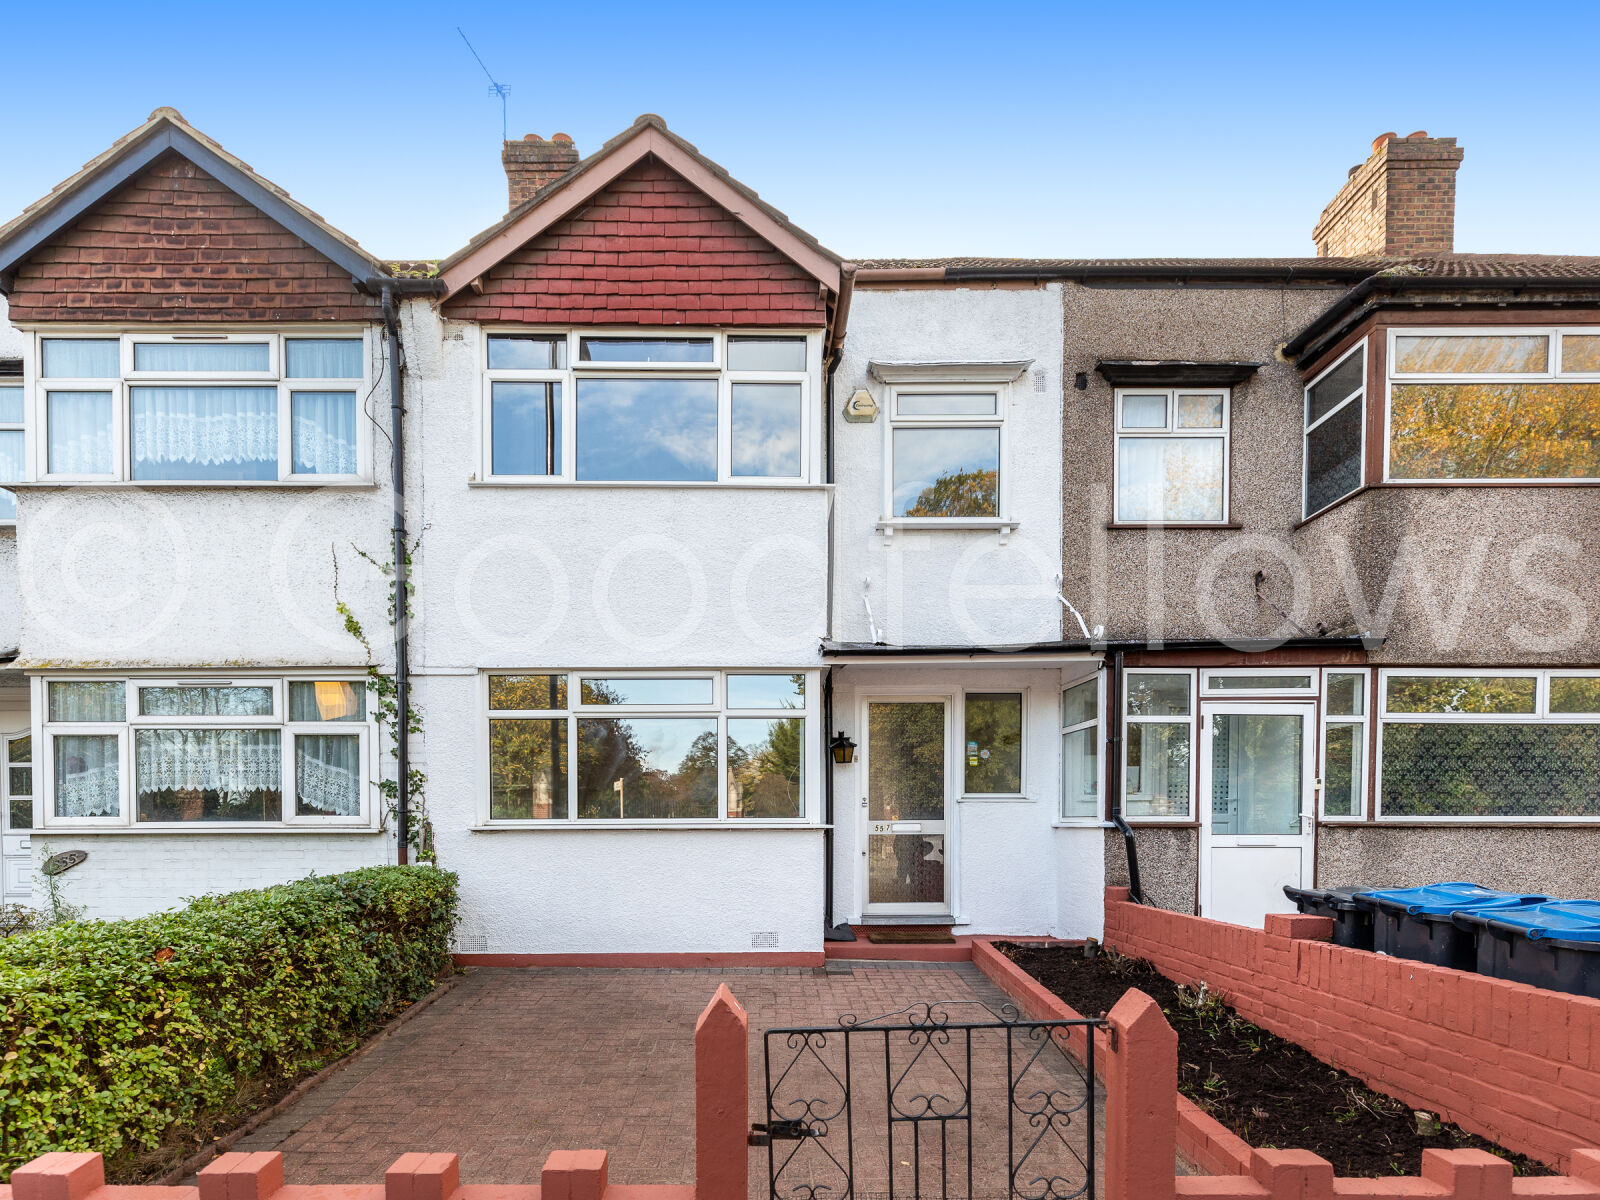 3 bedroom mid terraced house to rent, Available now Mitcham Road, Croydon, CR0, main image